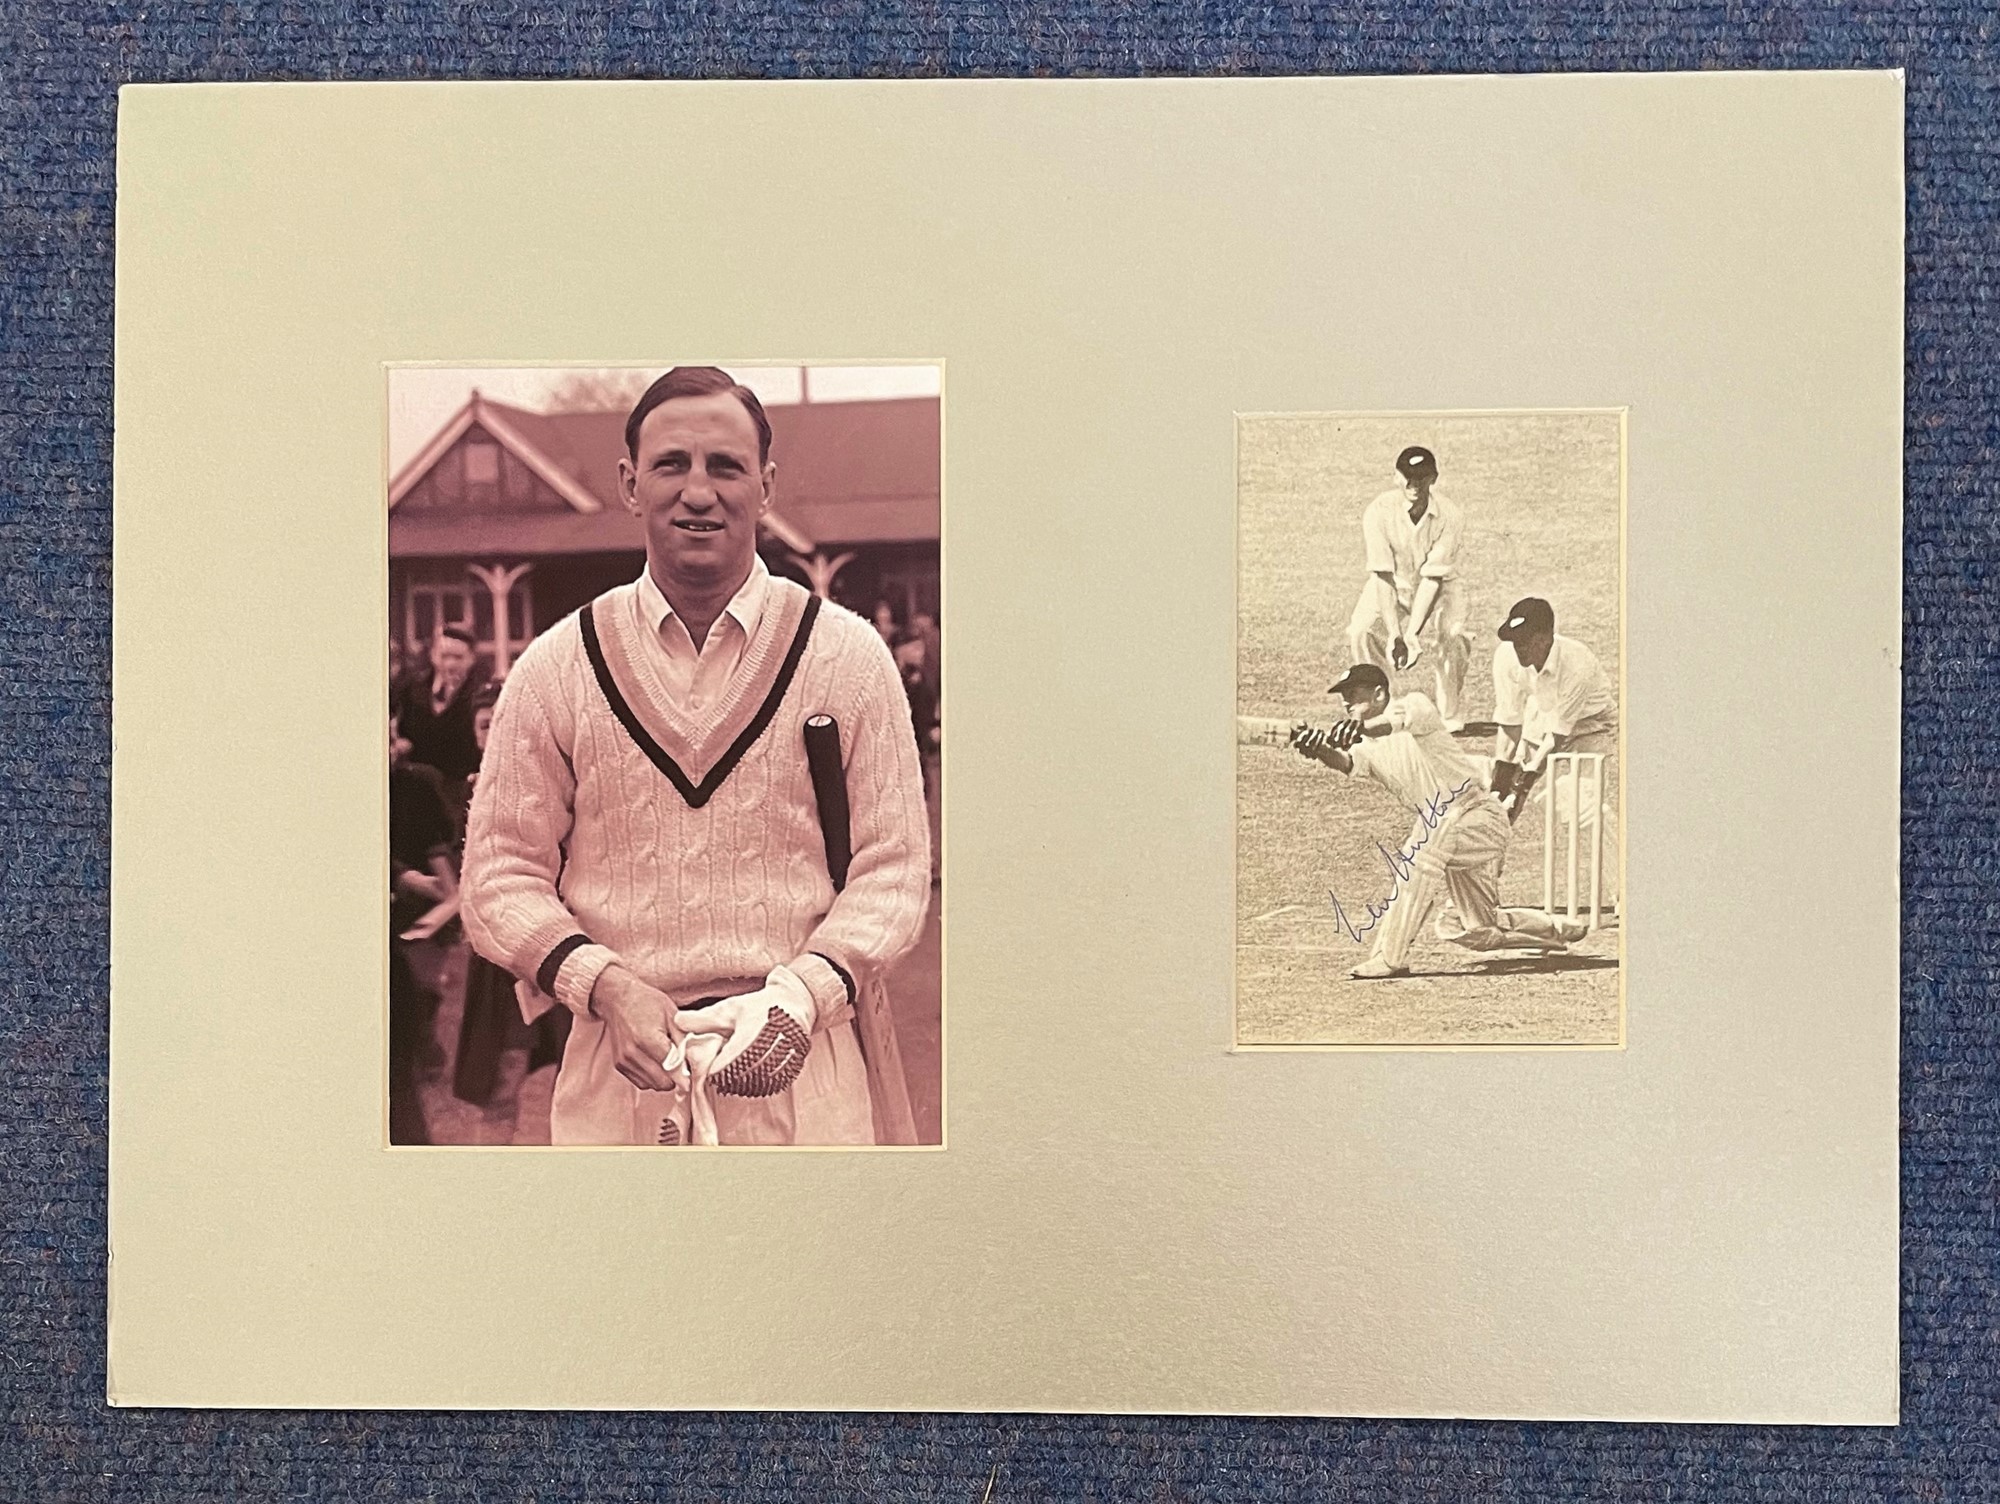 Cricket, Len Hutton matted signature piece, approx. 12x16. featuring a two black and white